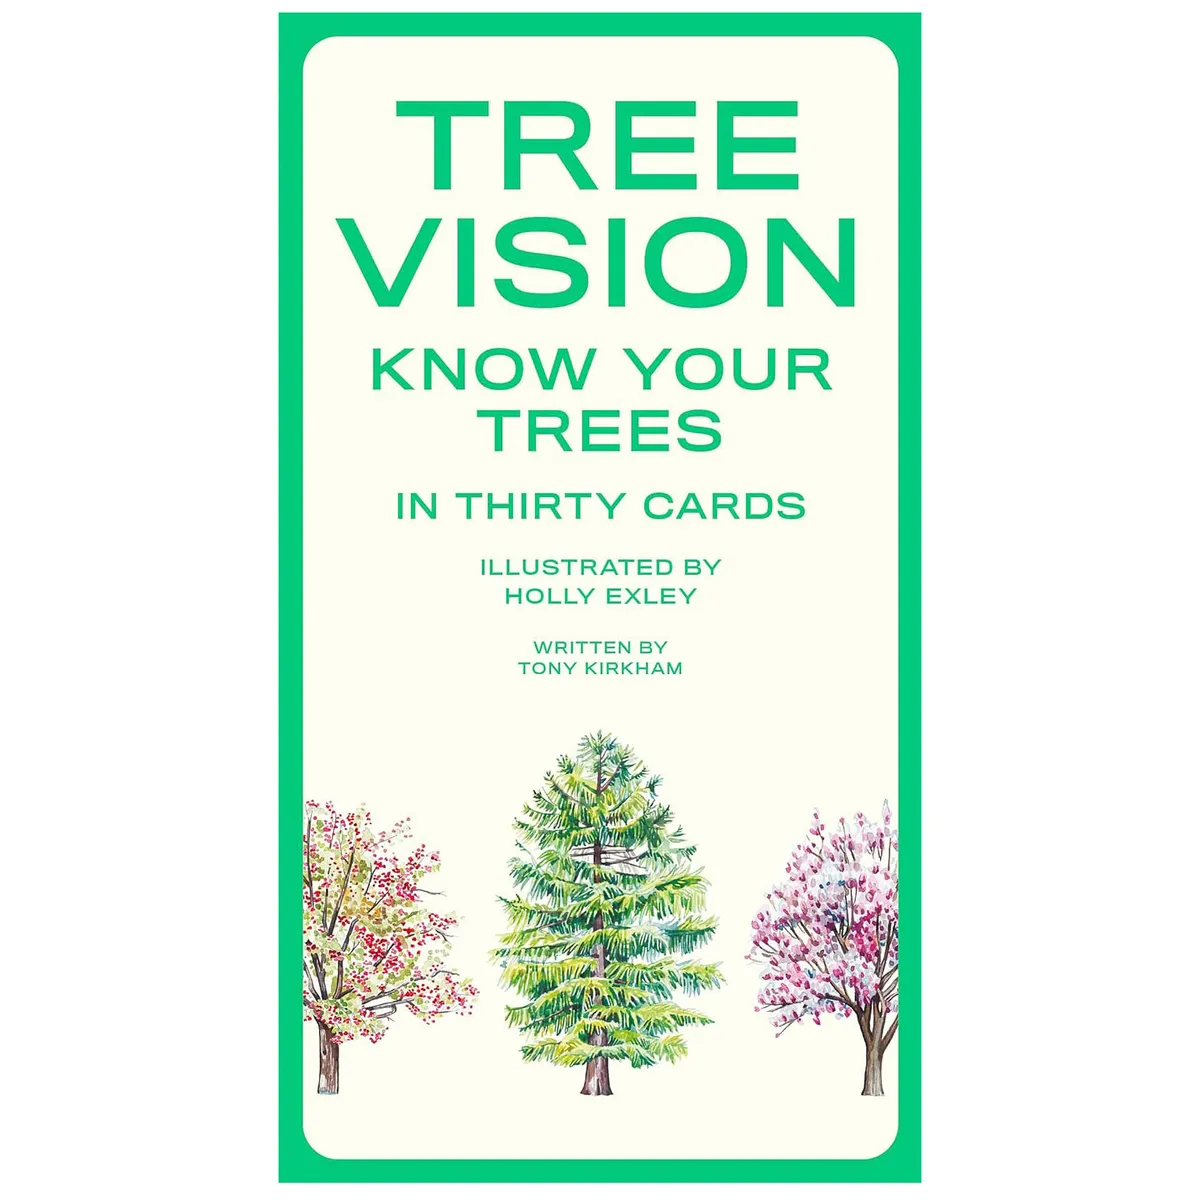 Tree Vision: Know Your Trees in 30 Cards on a white background